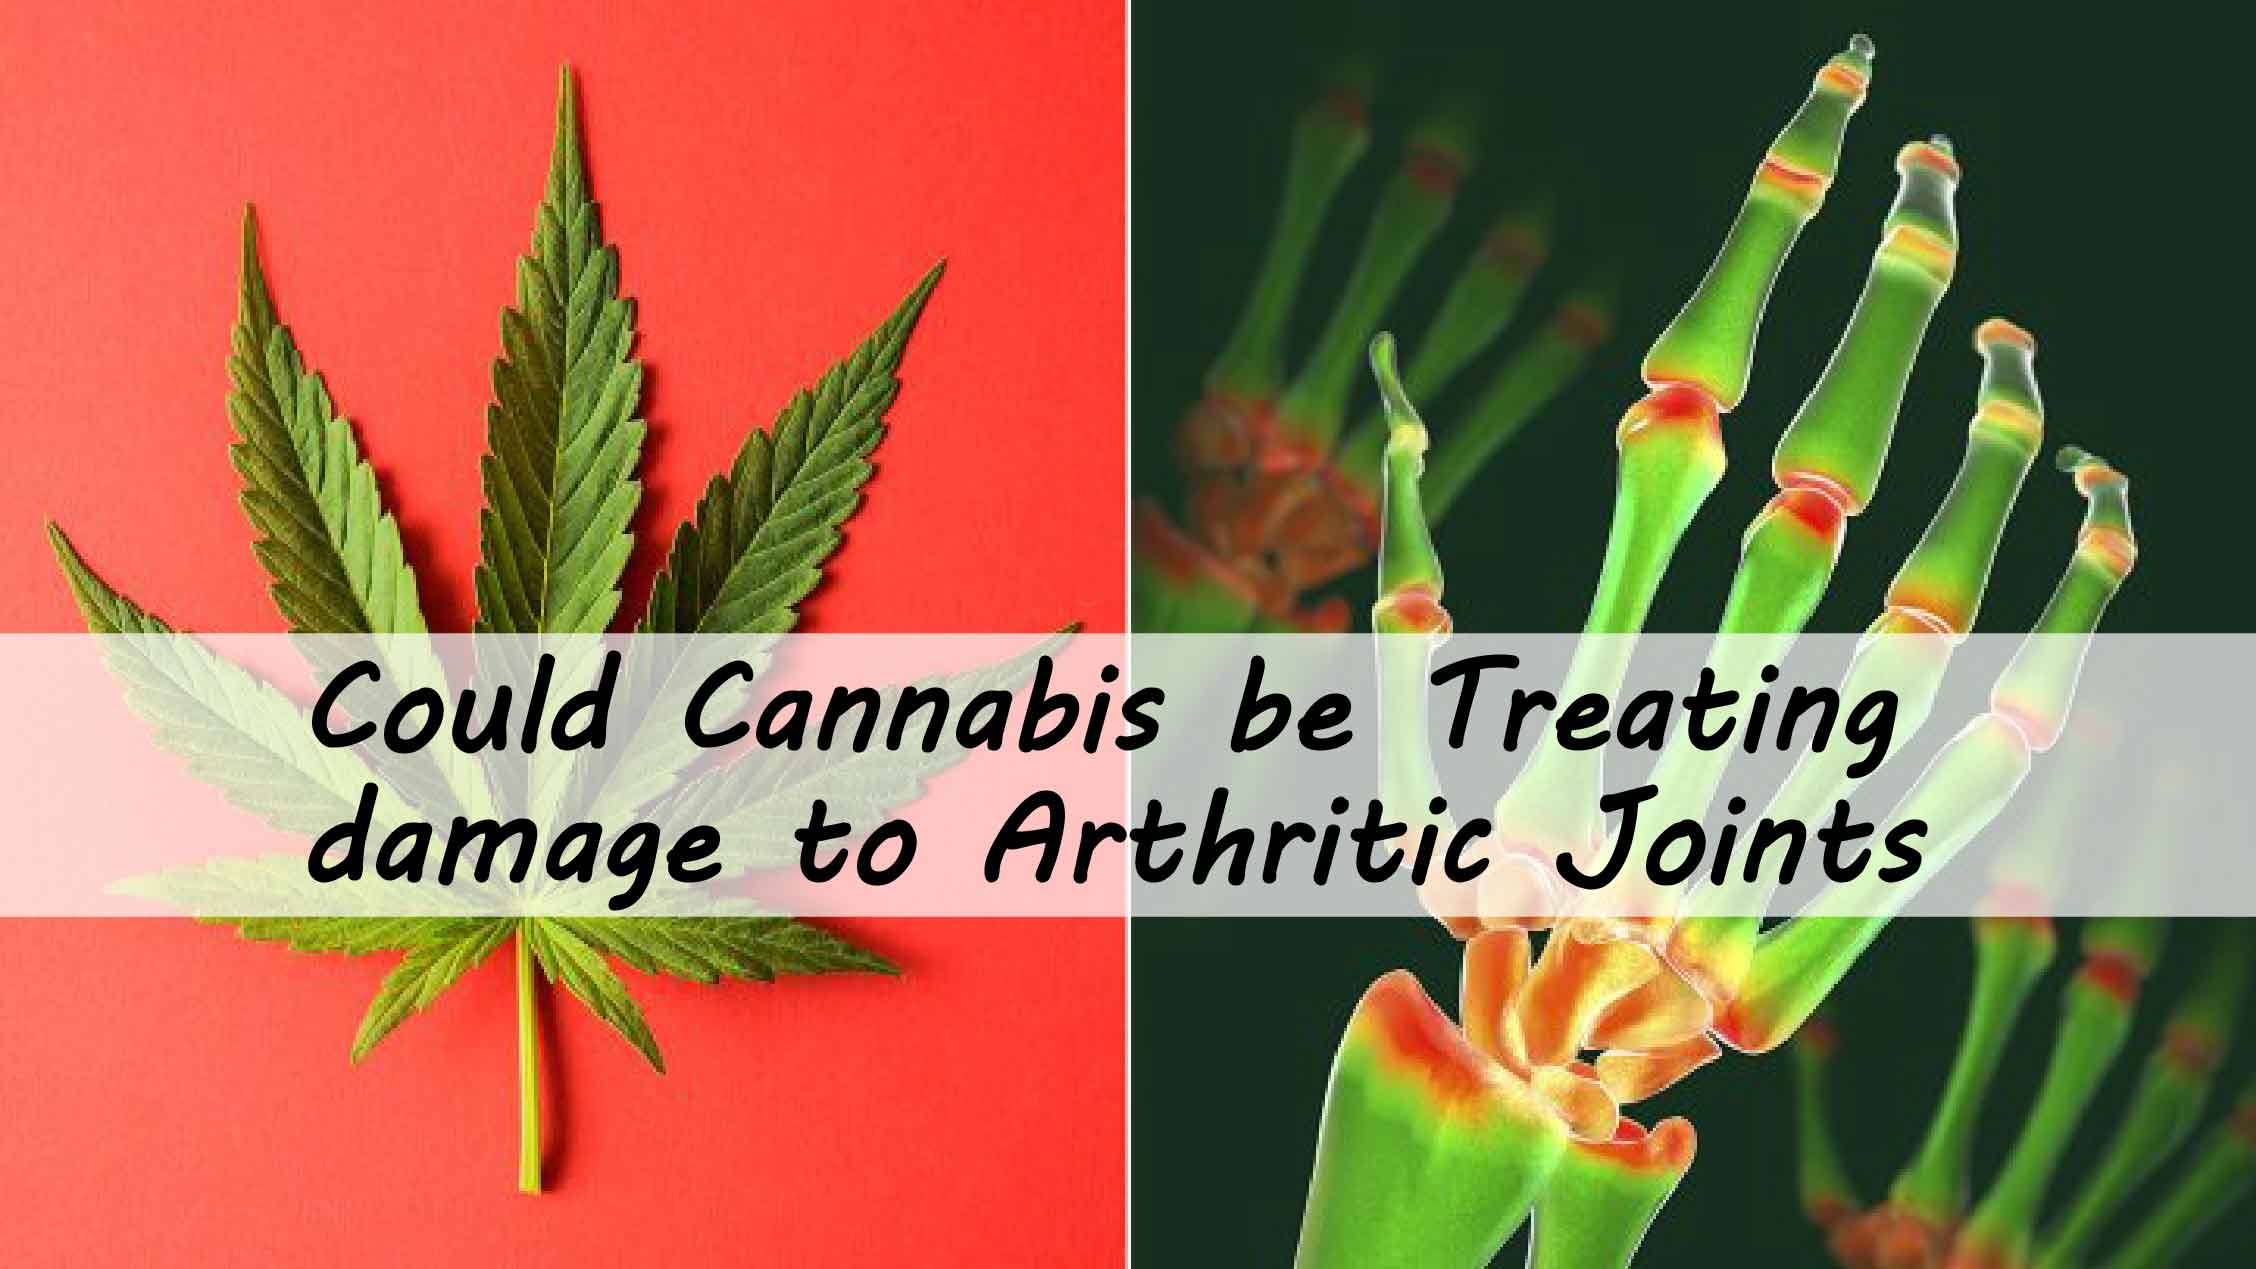 Could Cannabis be treating damage to Arthritic Joints